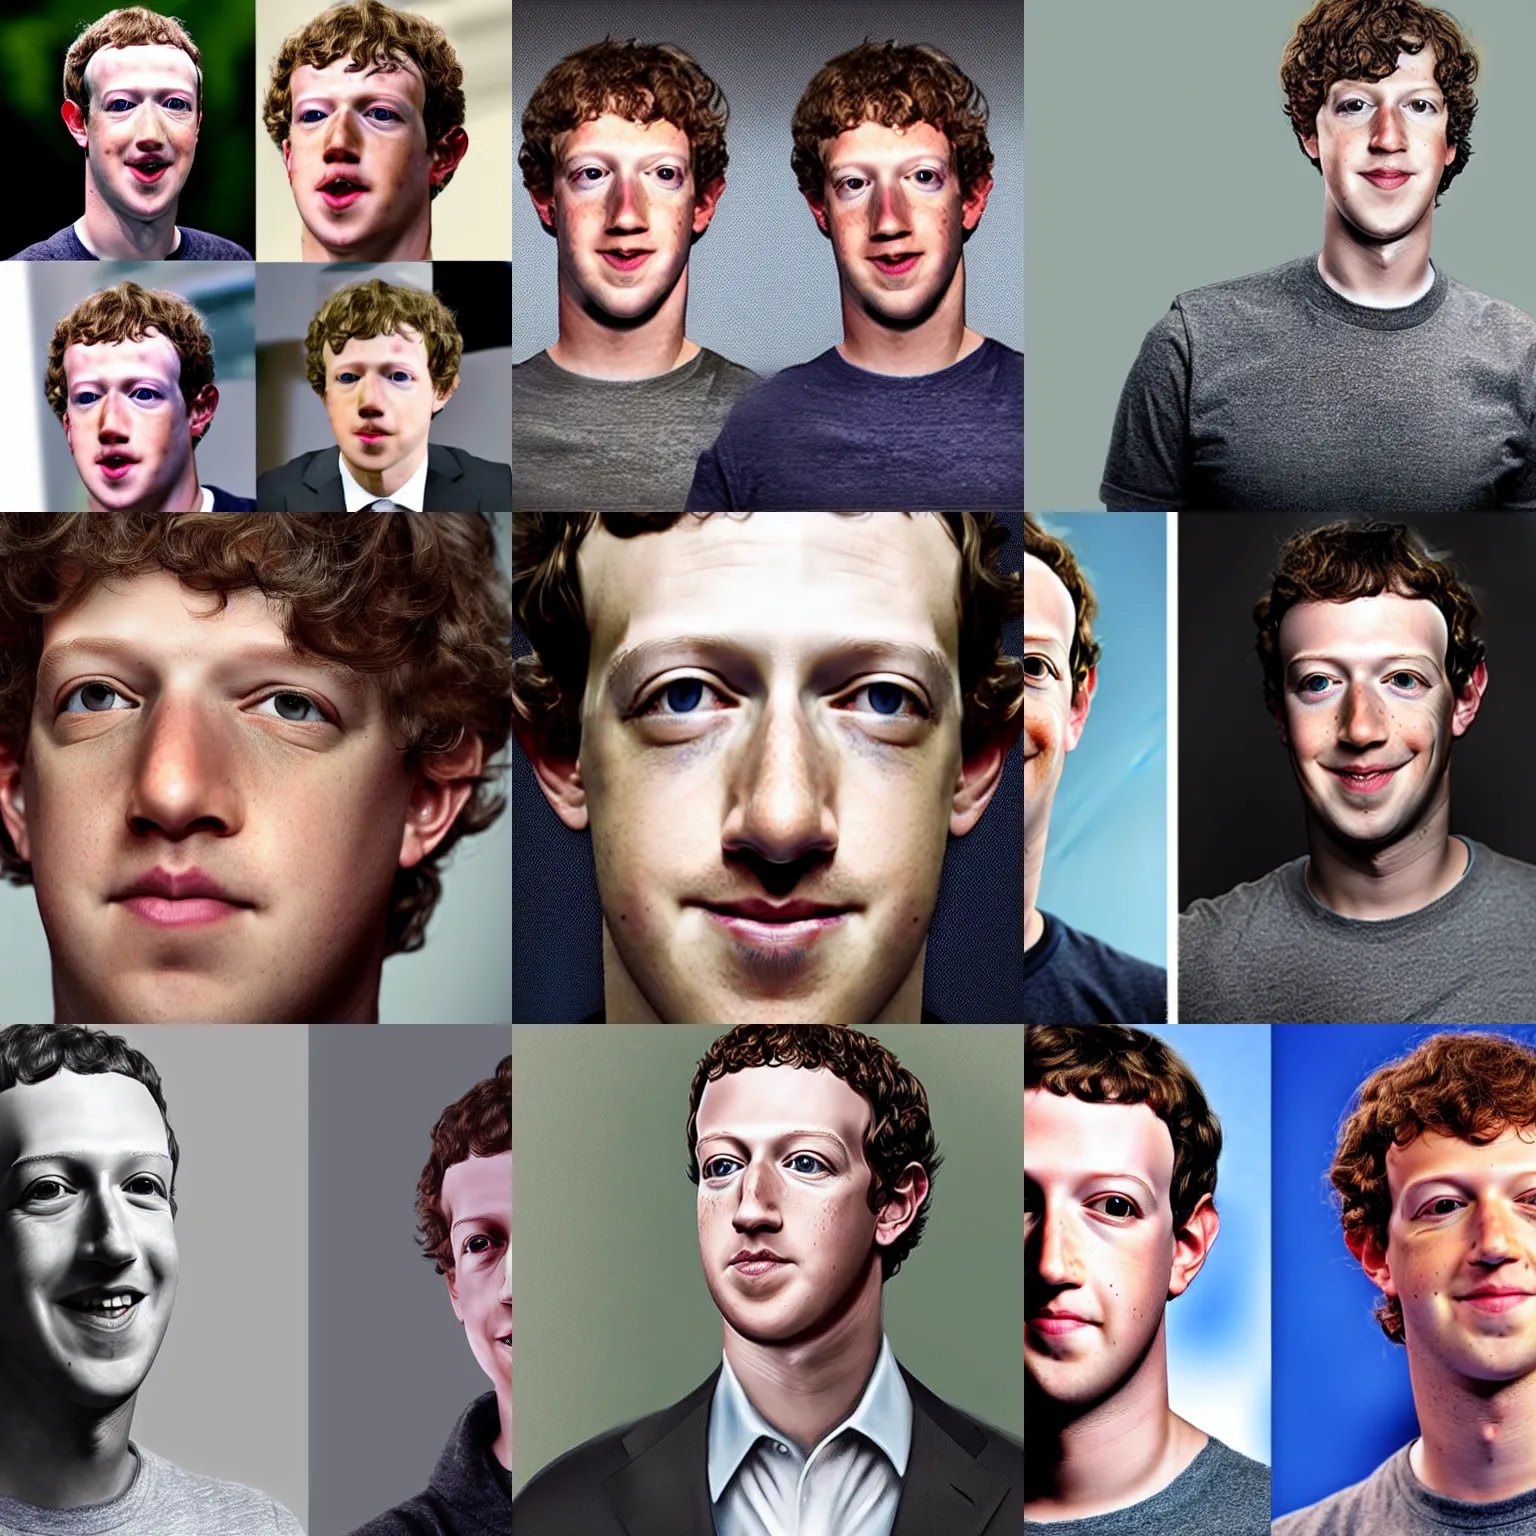 Prompt: A portrait of Mark Zuckerberg fused with Jesse Eisenberg's face